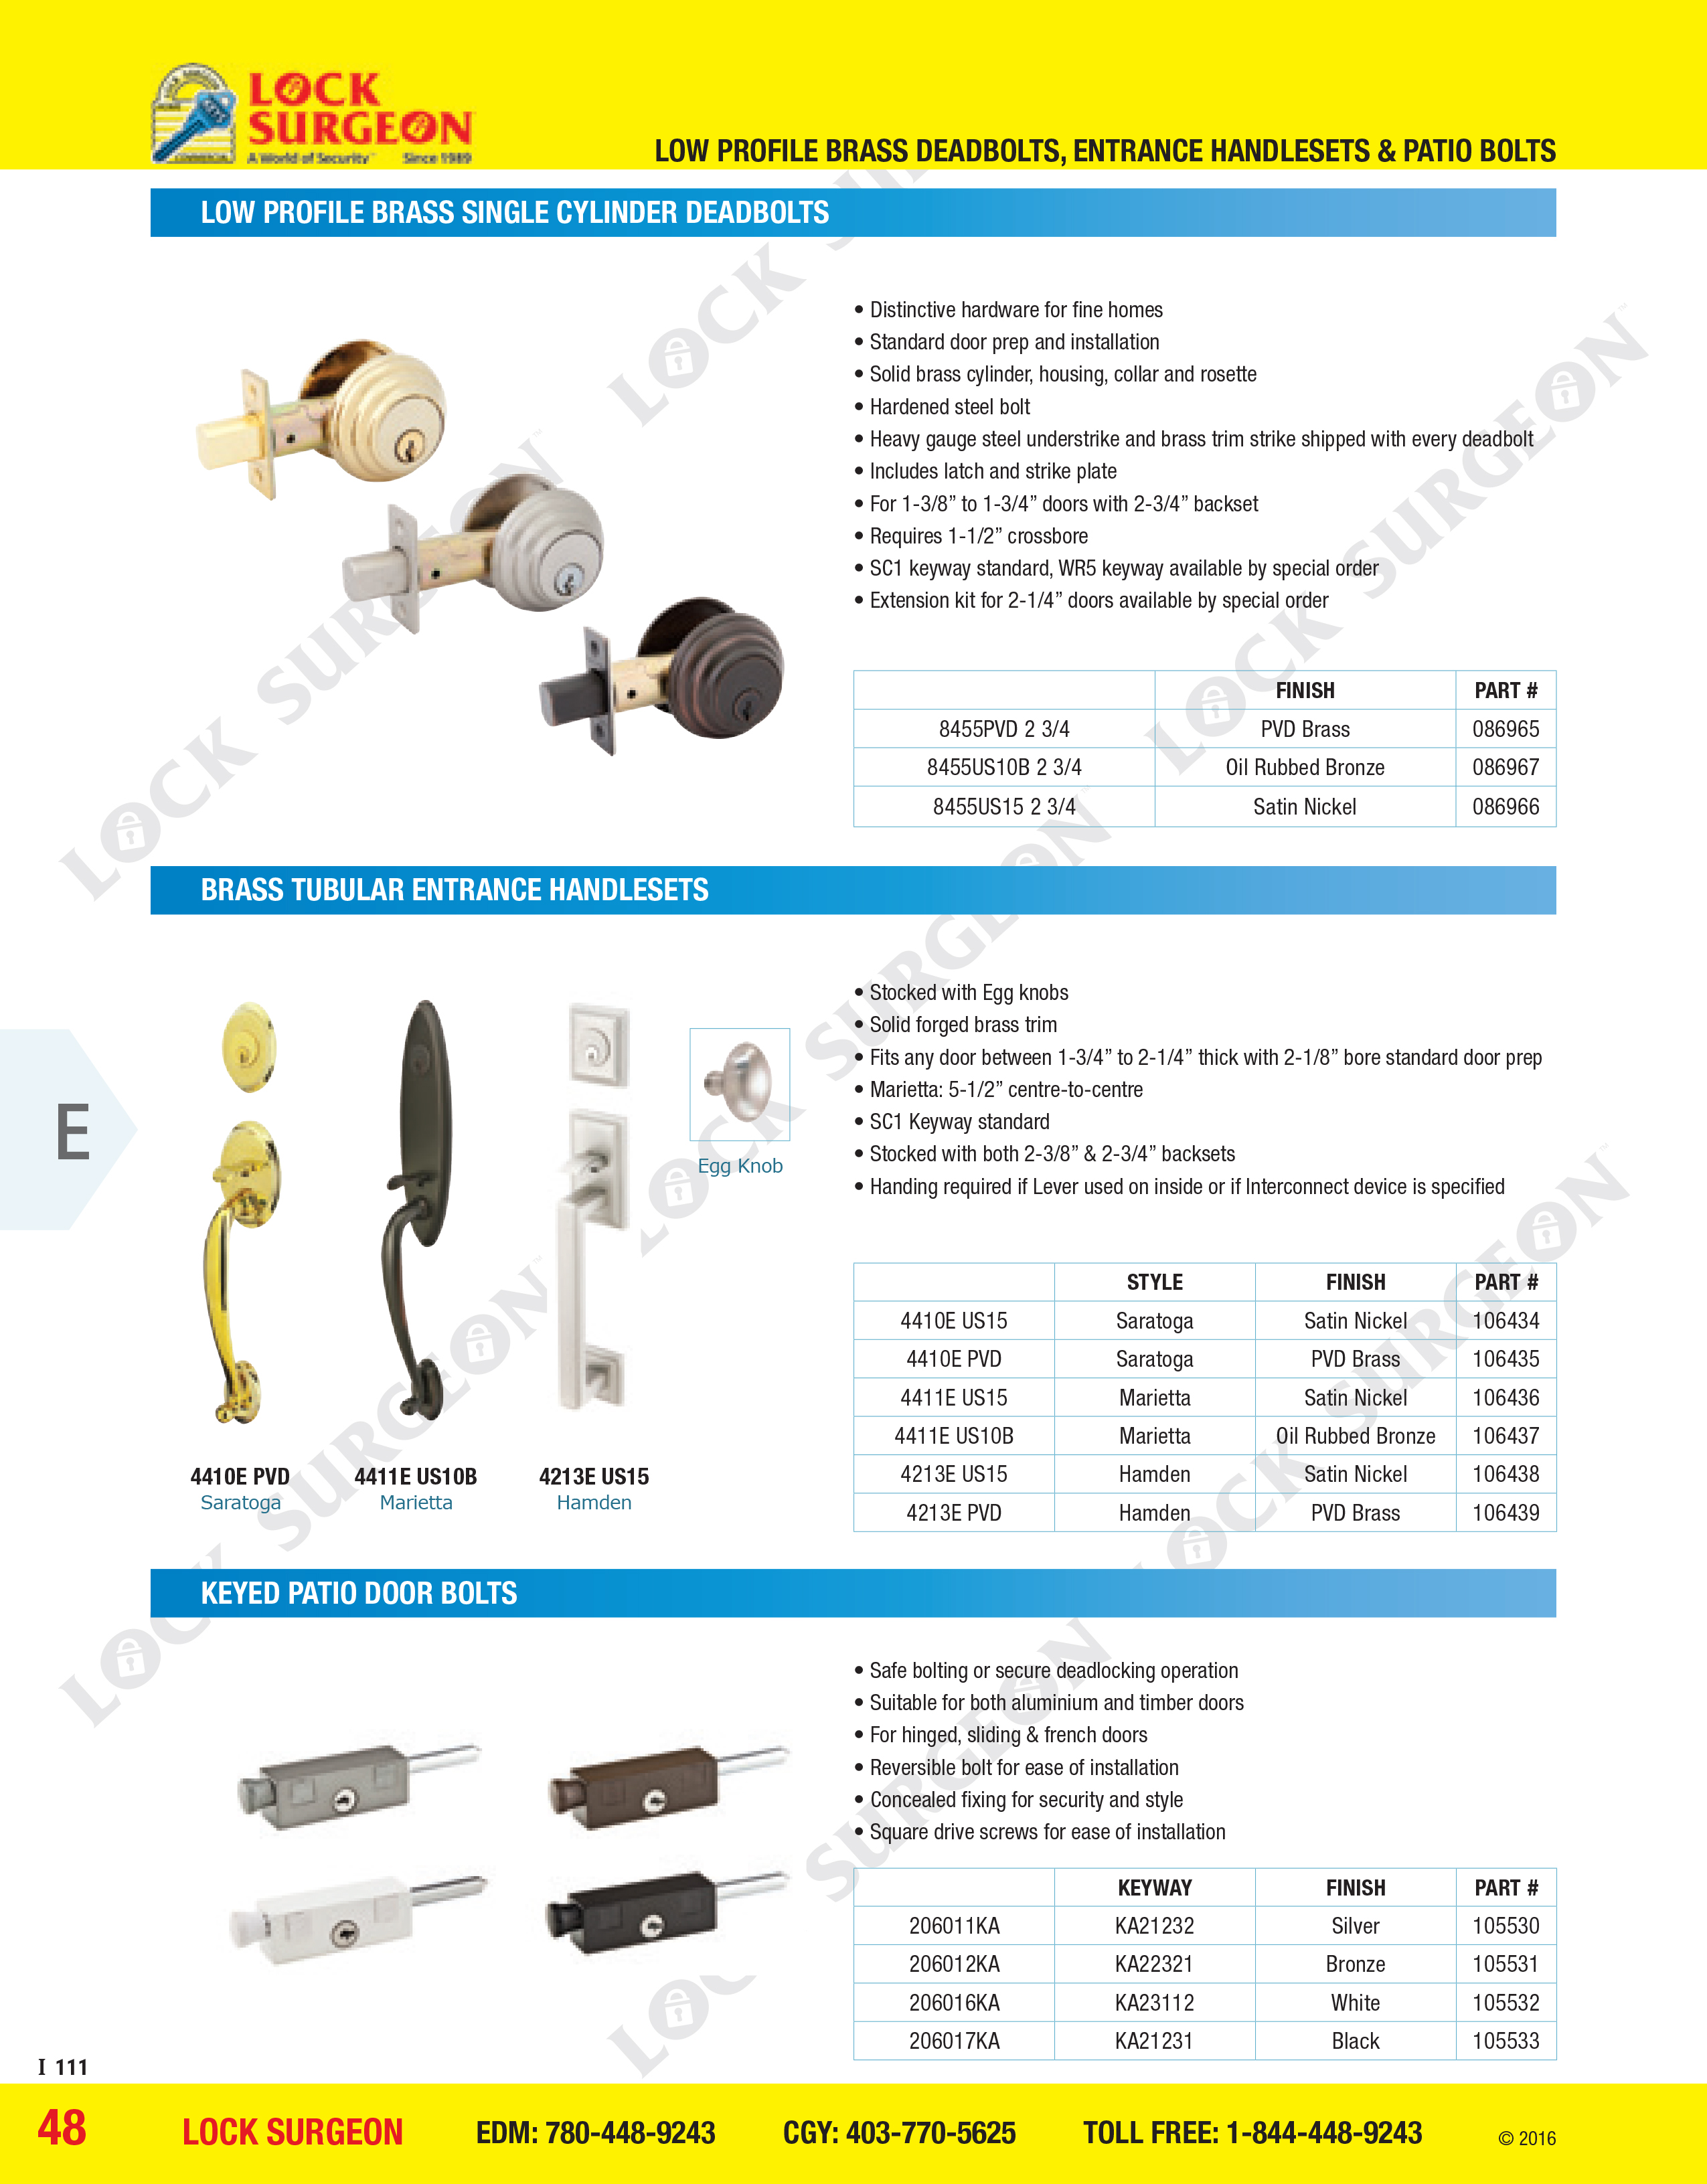 Schlage deadbolts and handles. Secondary locking Patio pins to lock down patio doors